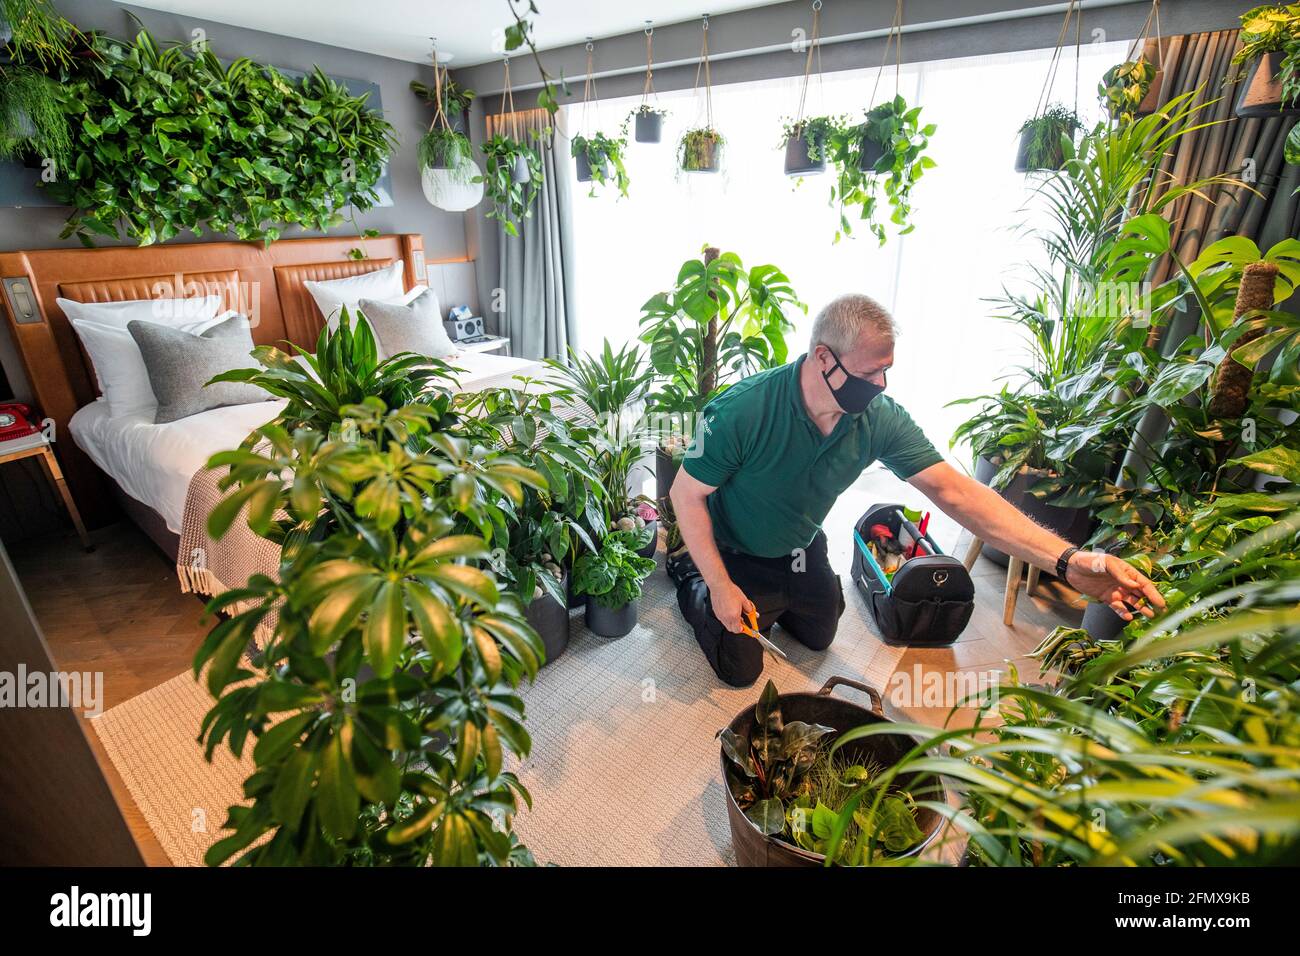 Horticulturalist Steve Soika tends to the plants in the new 'nature-themed' room at The Kimpton Blythswood Square hotel in Glasgow. ÔLa Chambre VerteÕ, is an immersive luxury hotel suite experiment that measures the psychological and physical benefits of biophilic design and has been launched during Mental Health Awareness Week 2021. Picture date: Wednesday May 12, 2021. Stock Photo